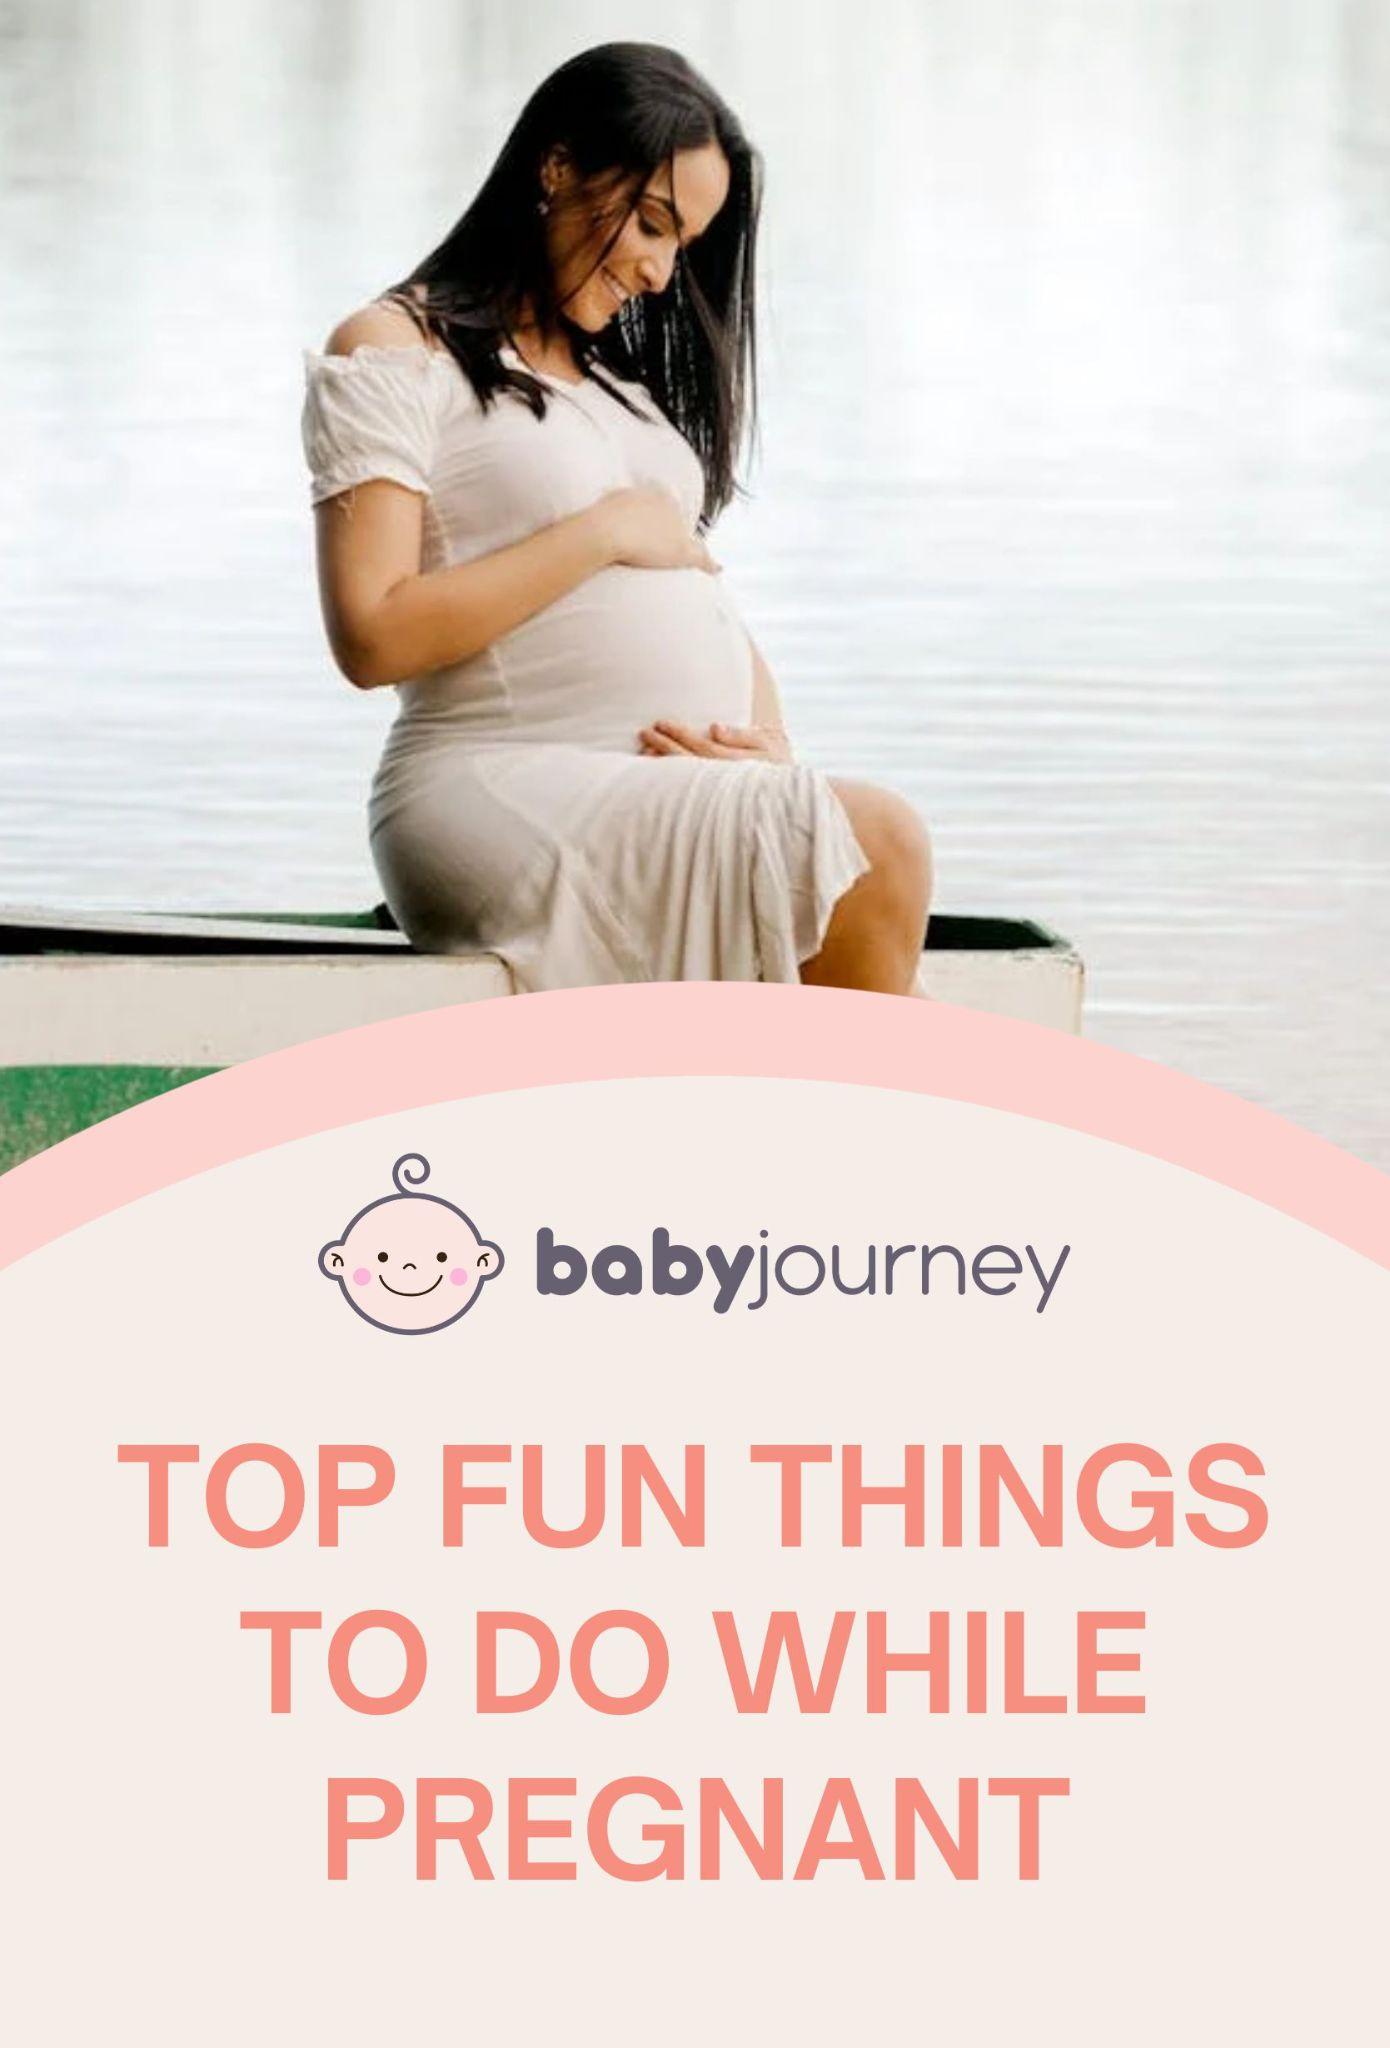 Top Fun Things to Do While Pregnant pinterest - Baby Journey